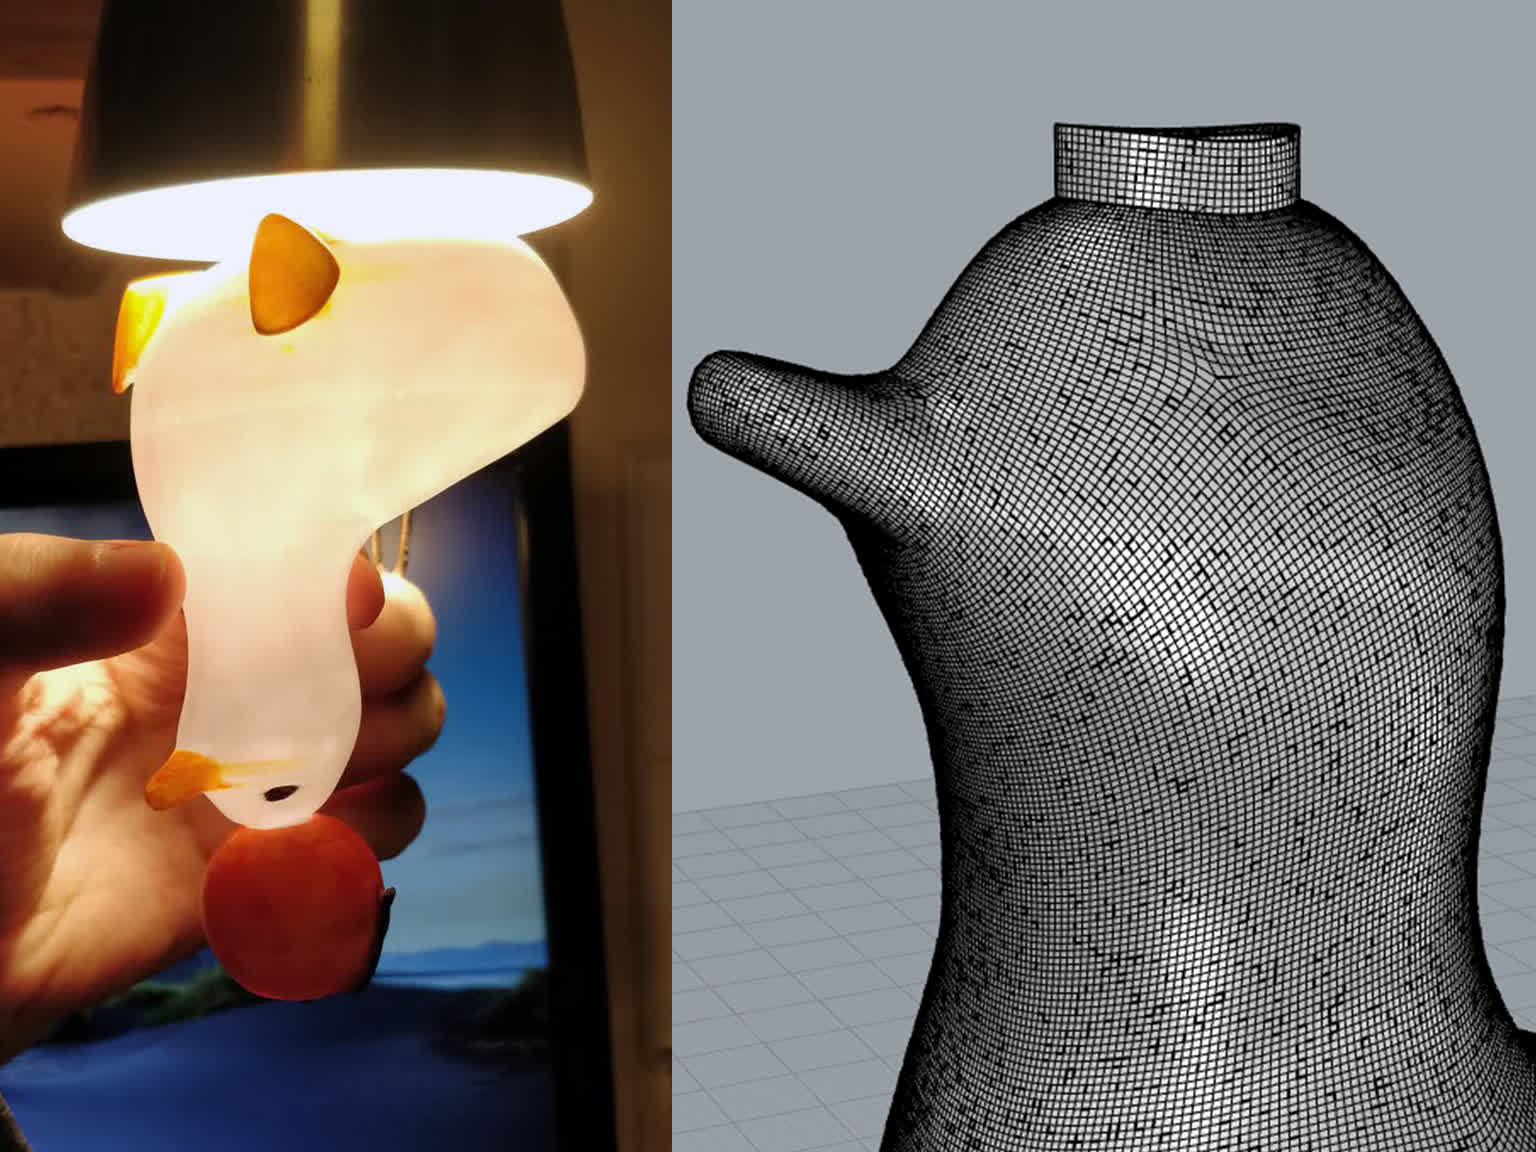 Left: 3D printed duck being held up to a lamp, lighting up because it's hollow. Right: The huge mesh in Rhino